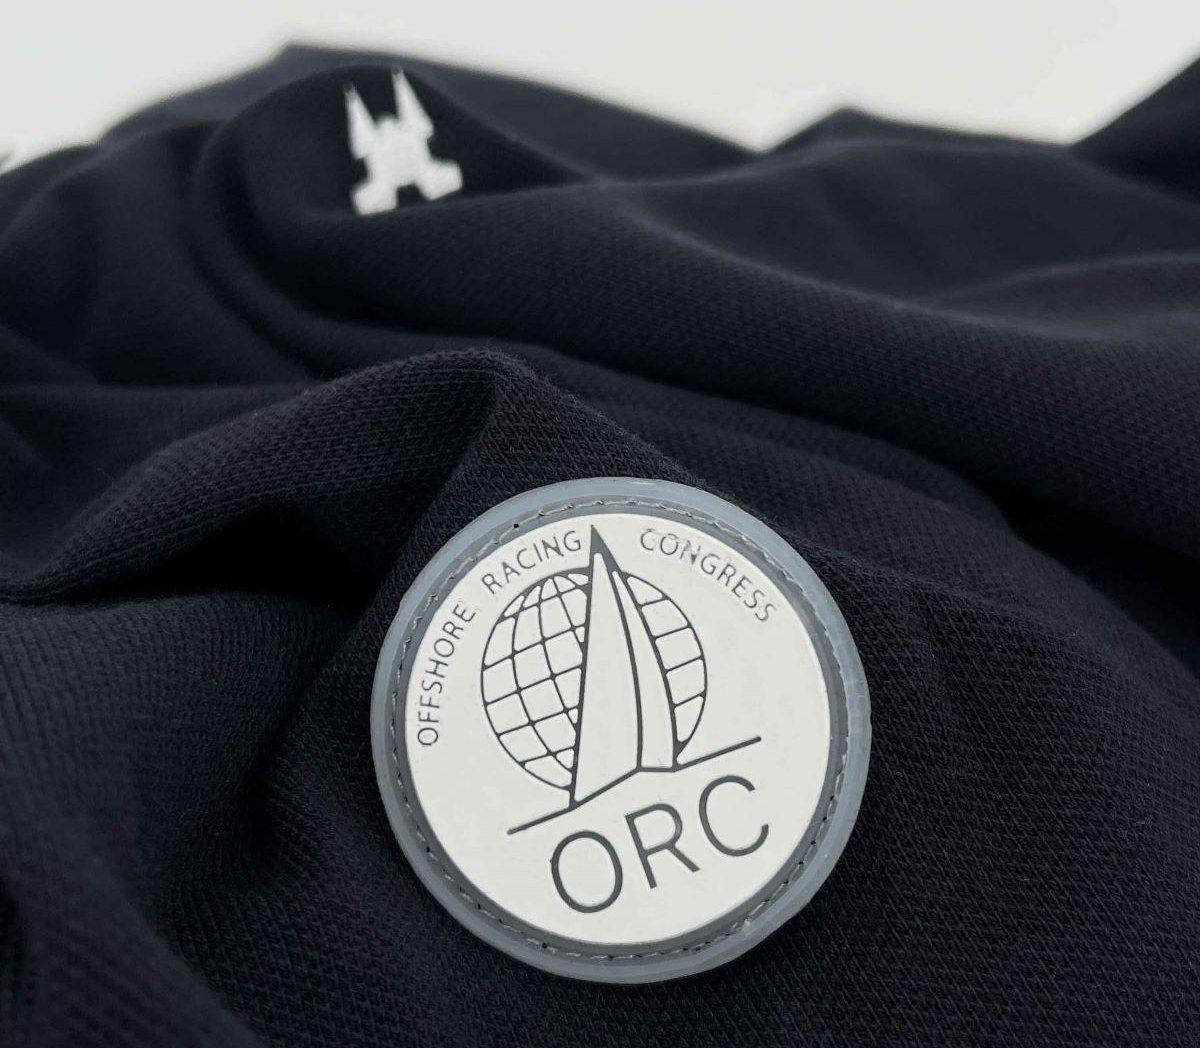 Gaastra is an Official Apparel Partner of ORC